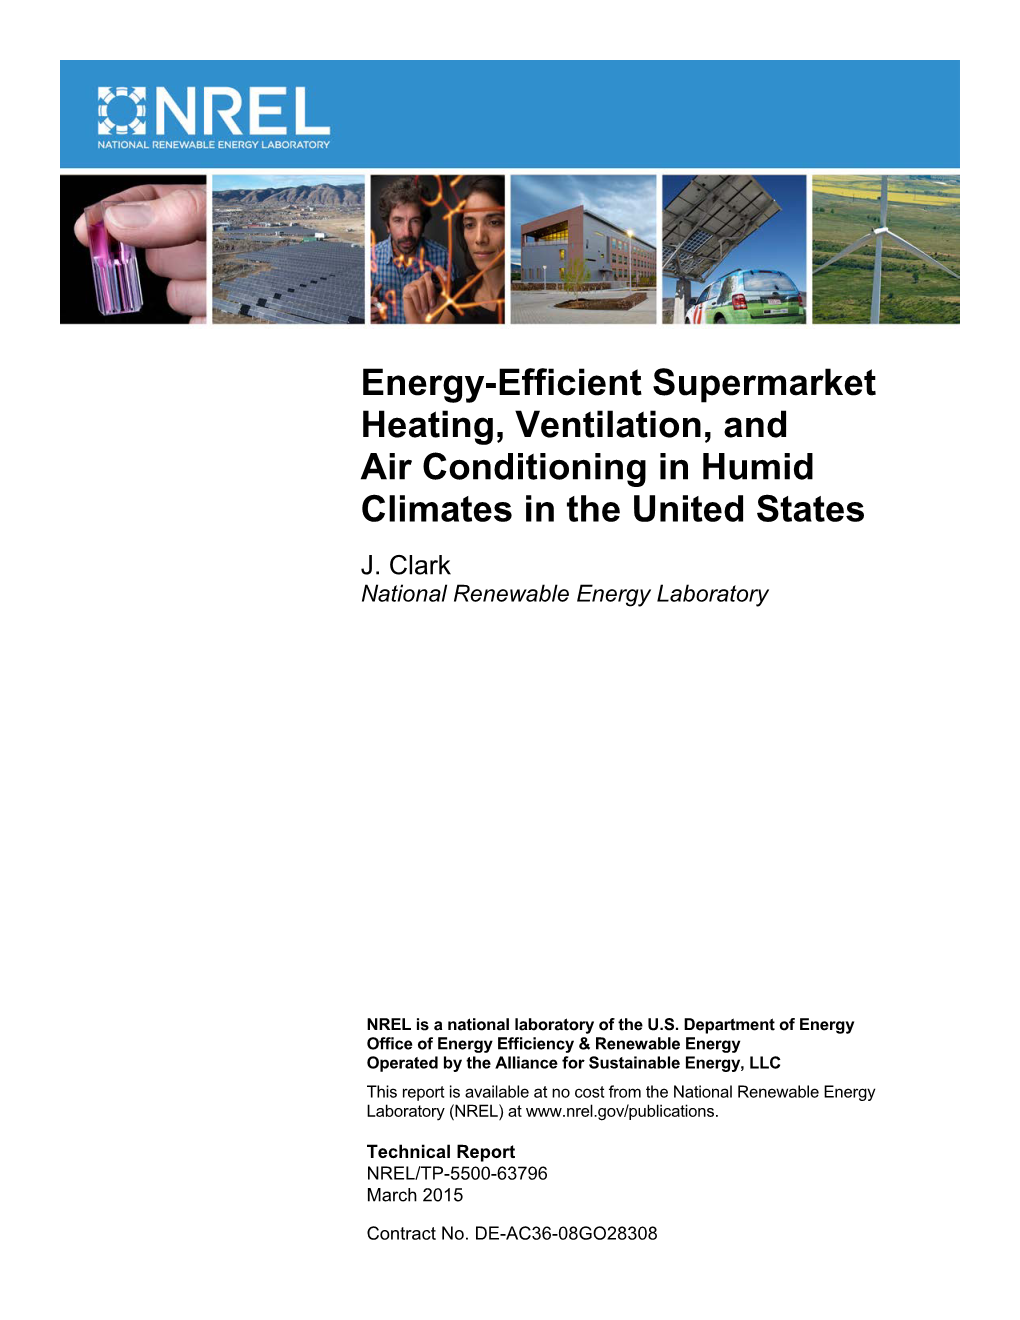 Energy-Efficient Supermarket Heating, Ventilation, and Air Conditioning in Humid Climates in the United States J